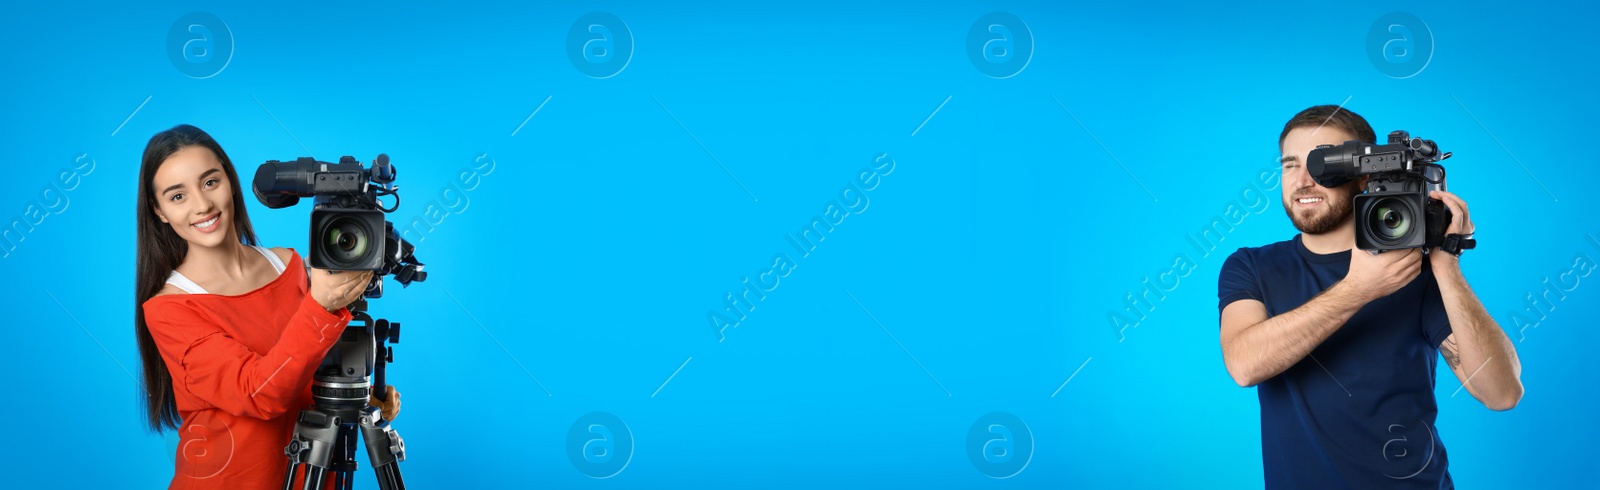 Image of Operators with professional video cameras on blue background, space for text. Banner design